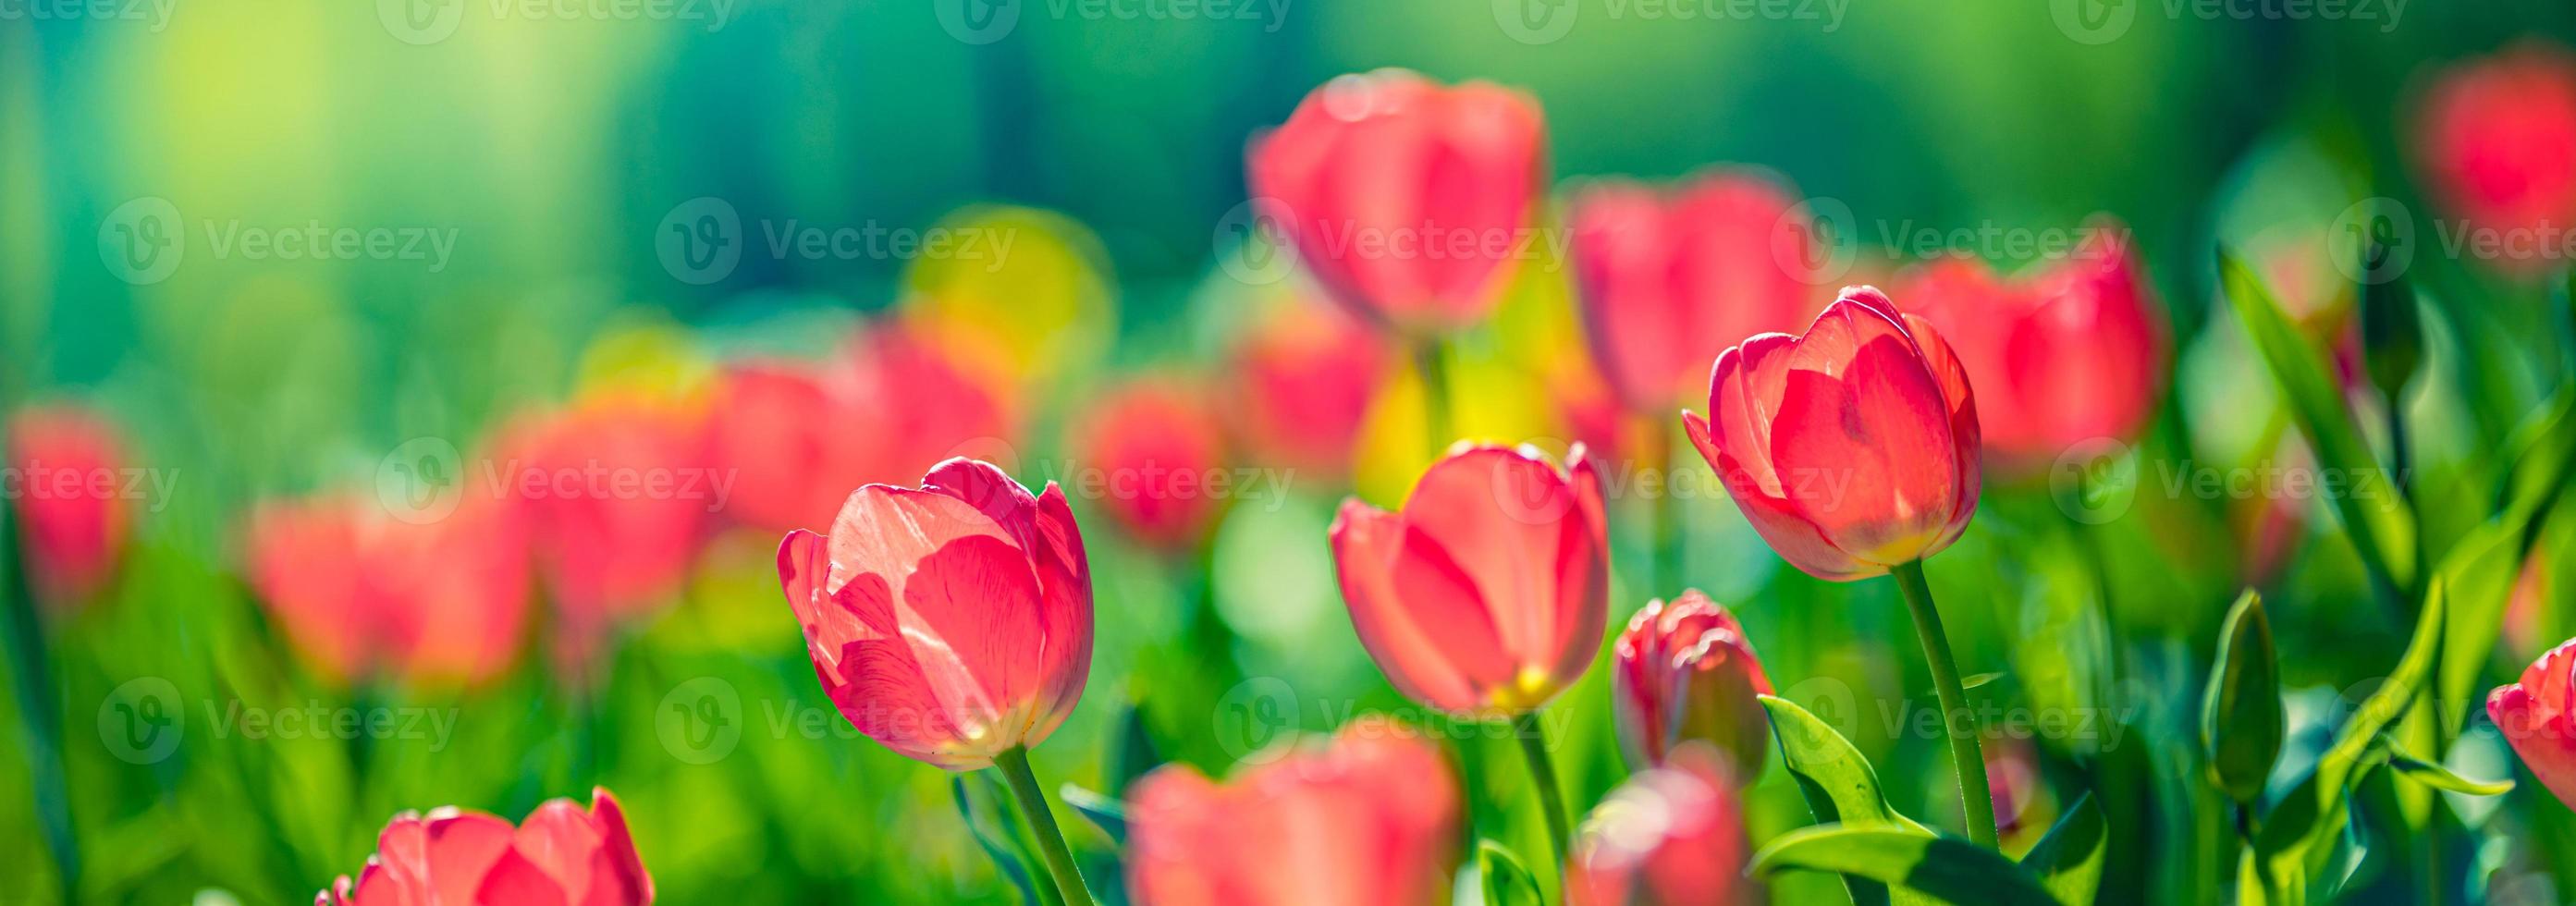 Beautiful closeup bright pink tulips on blurred spring sunny background. Amazing romantic springtime flowers background, love romance panoramic concept. Mothers day banner colorful dream nature meadow photo